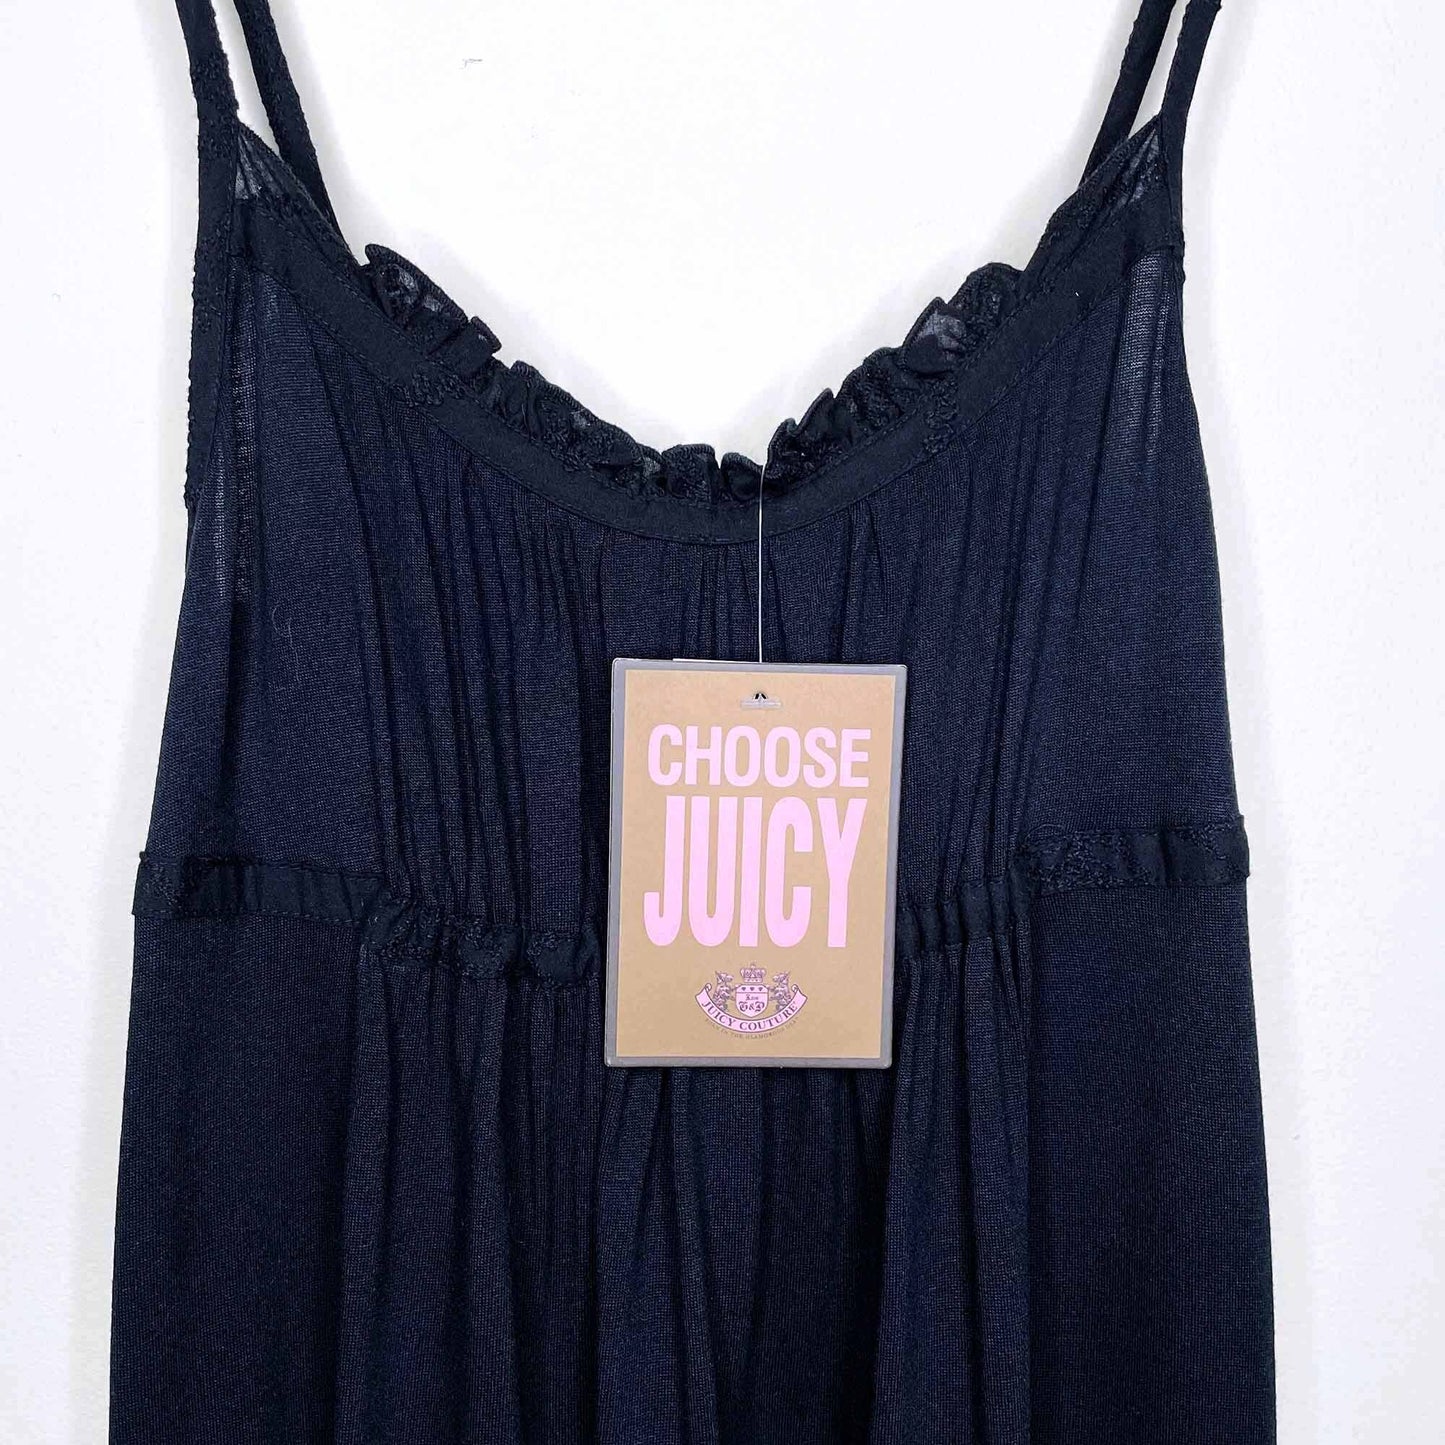 nwt juicy couture tank dress with swing hem -  size small